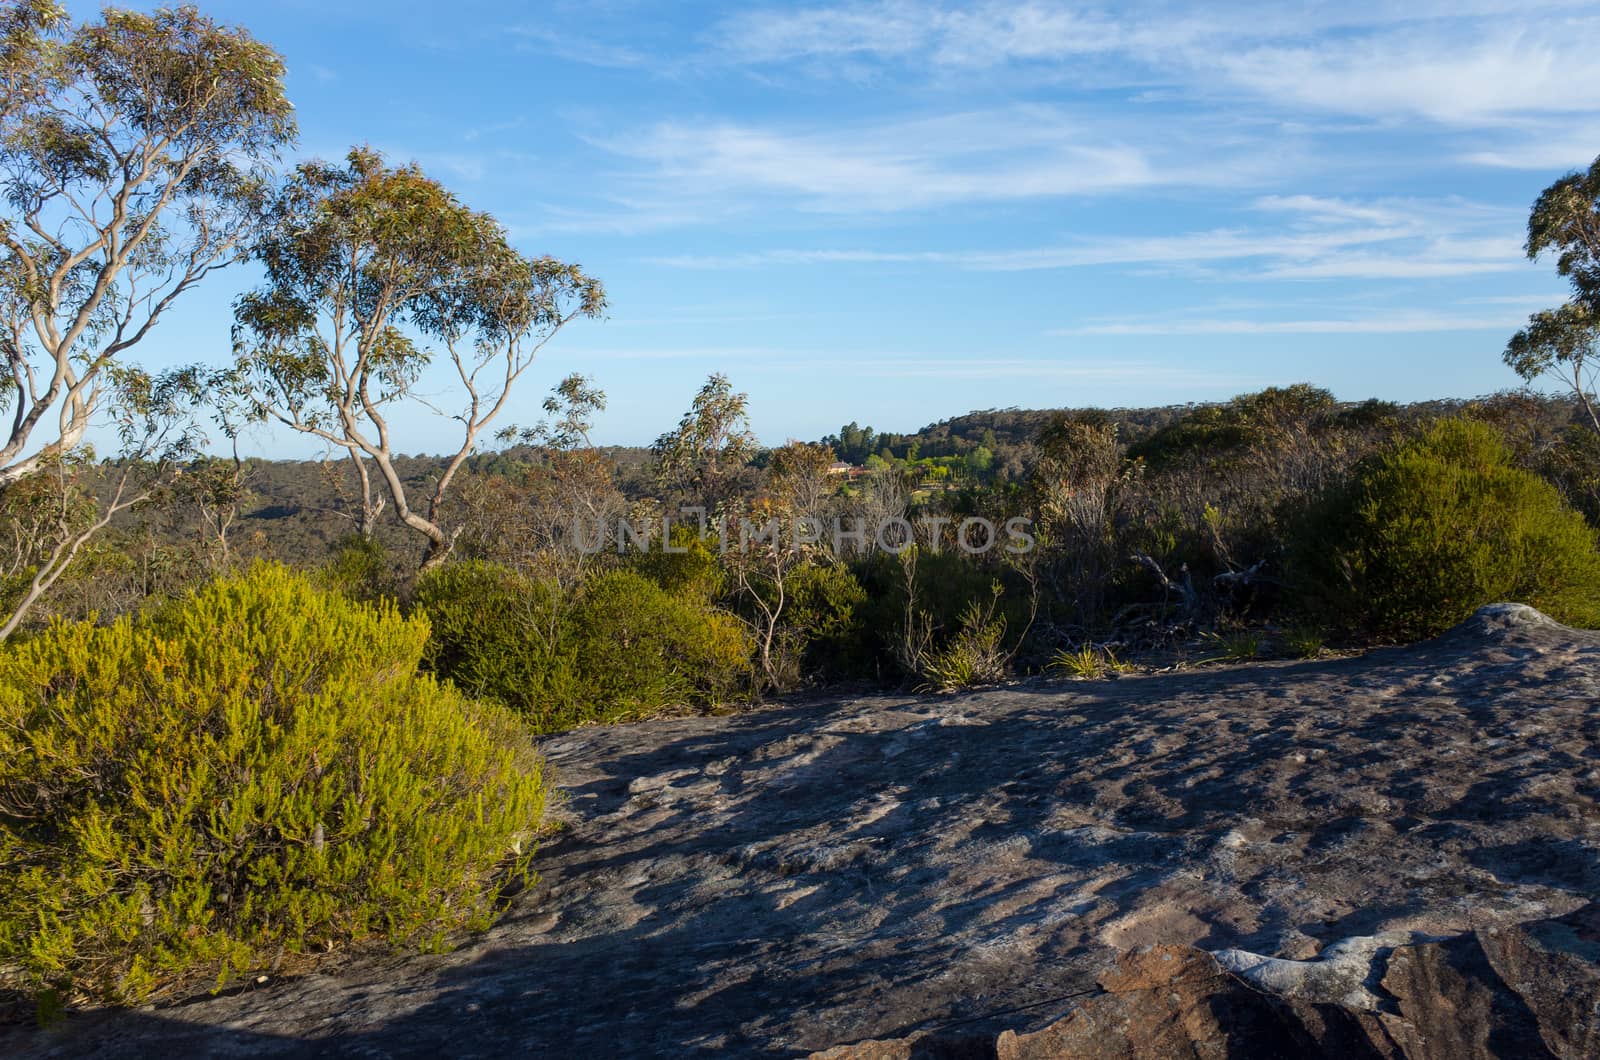 Eucalyptus Trees With Large Rock In Foreground by jaaske